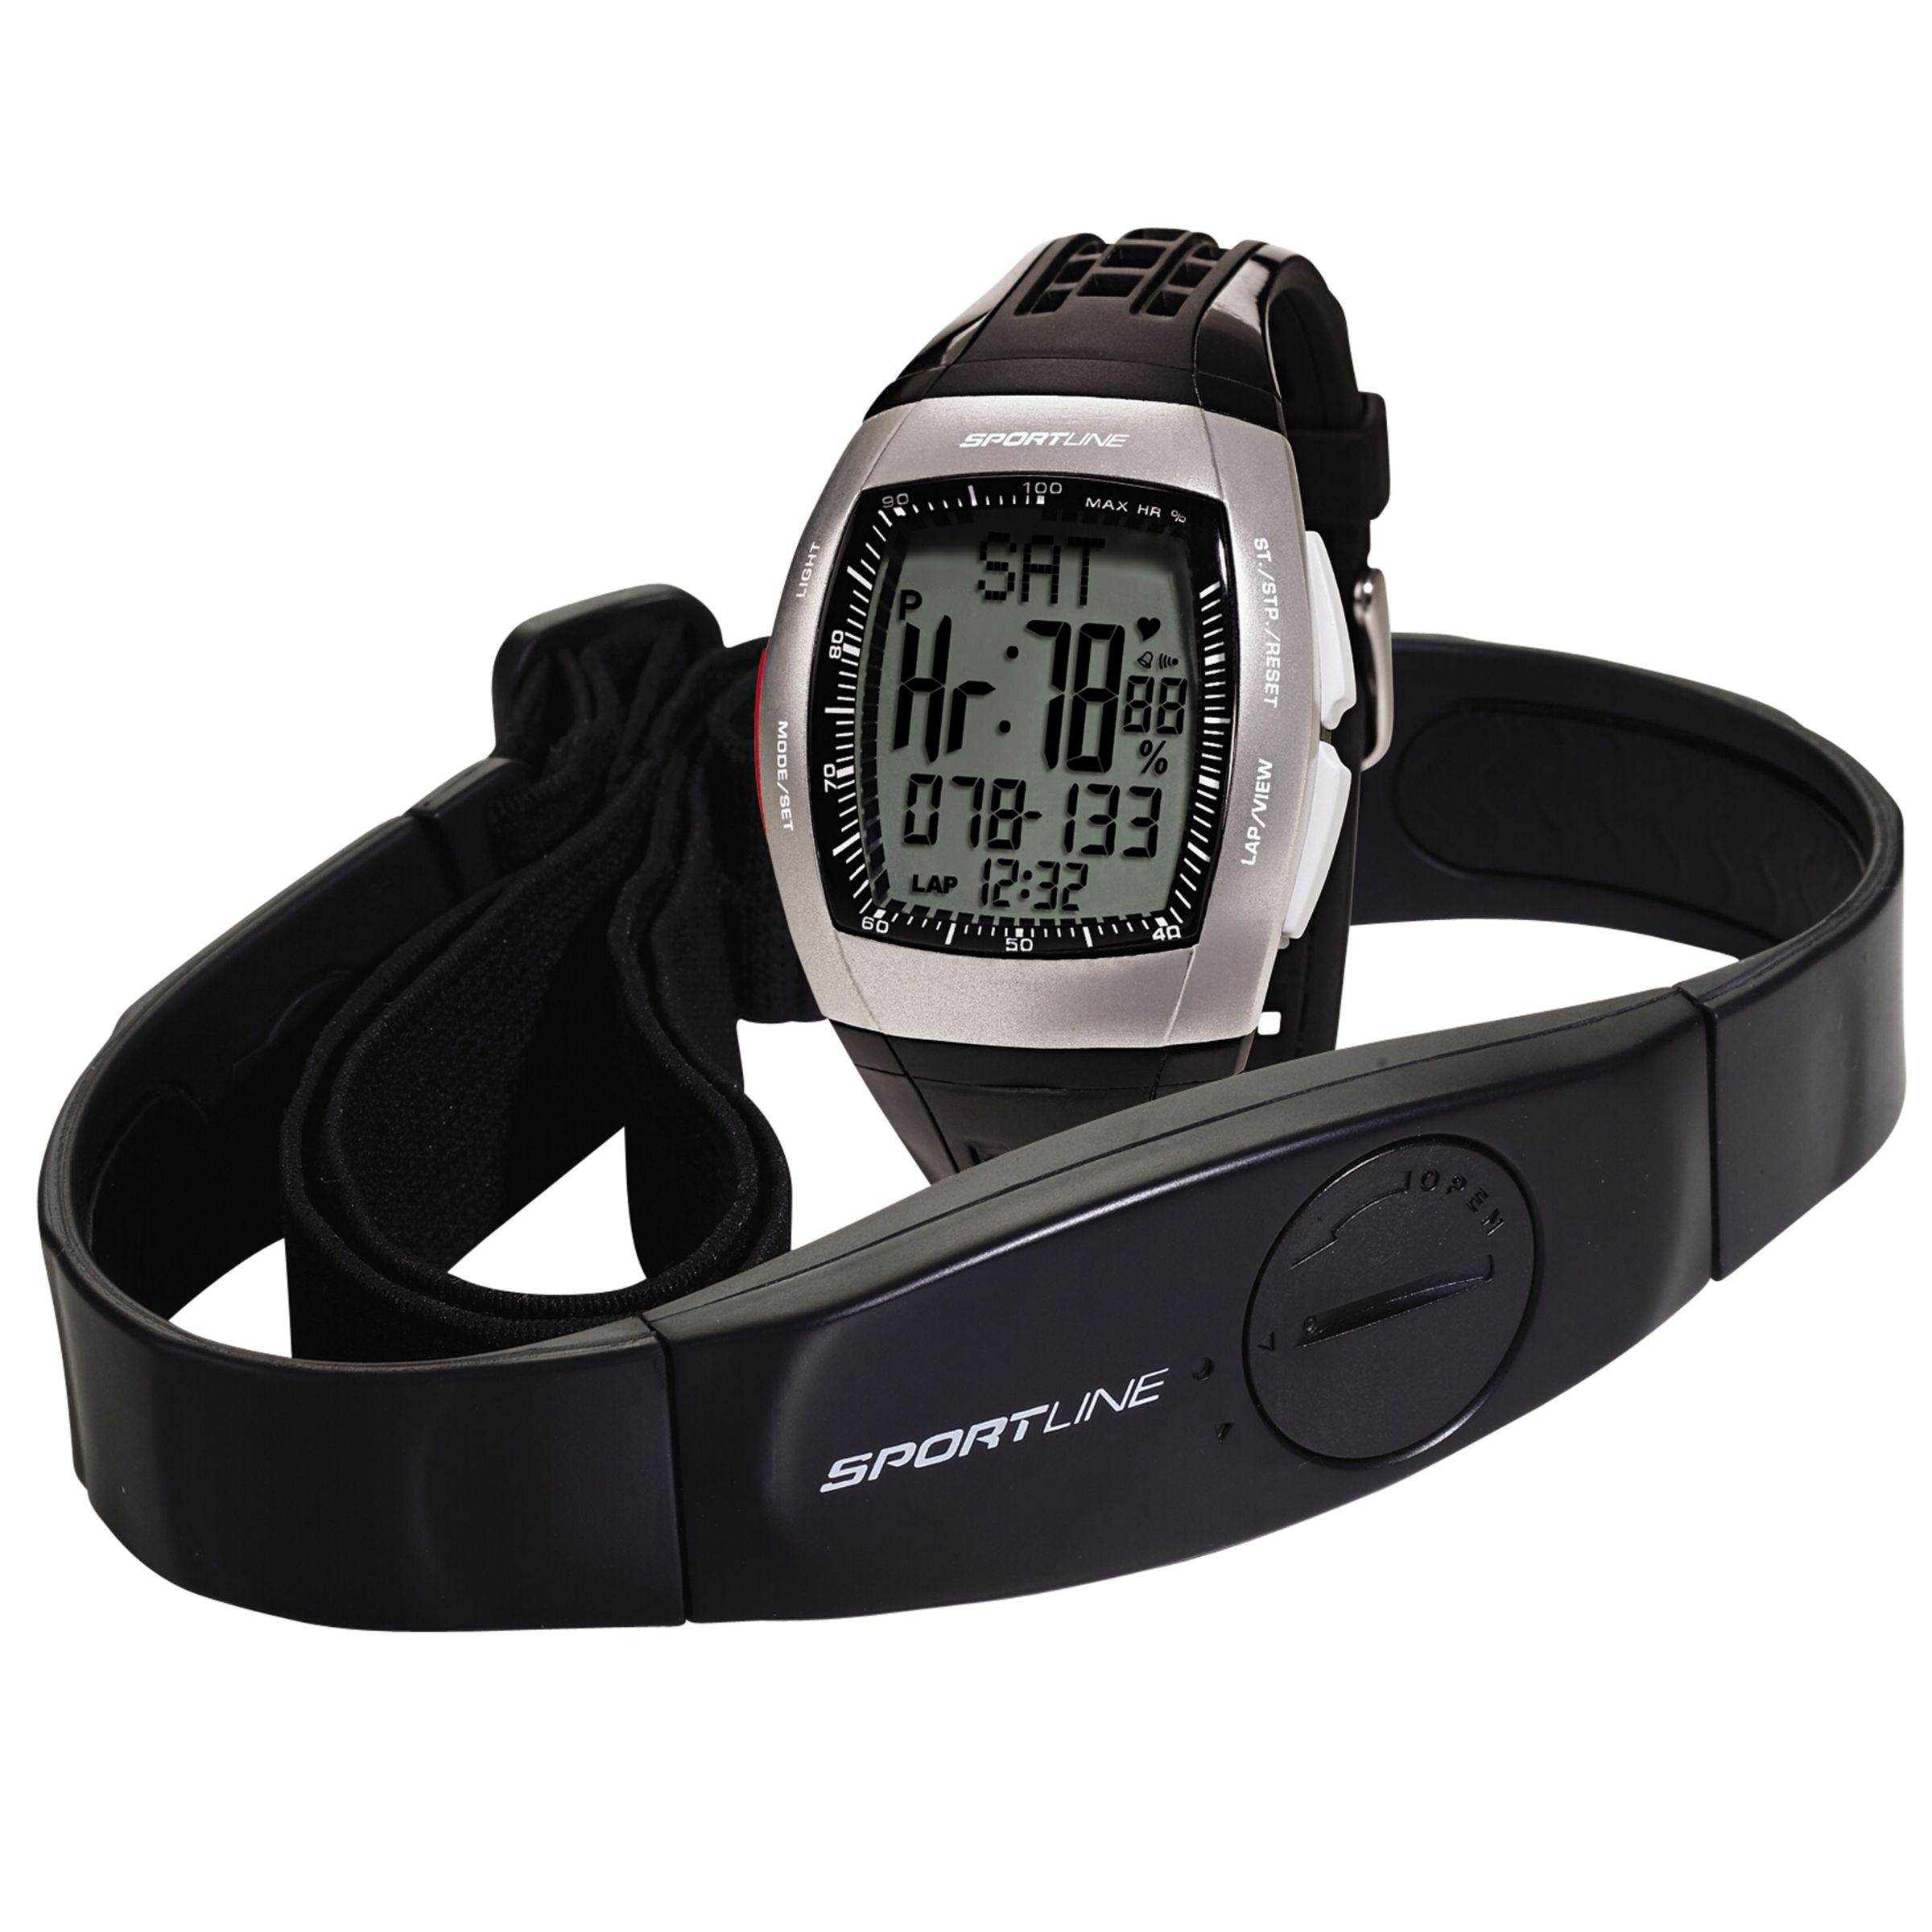 Sportline DUO 1060 Speed and Distance Heart Rate Monitor